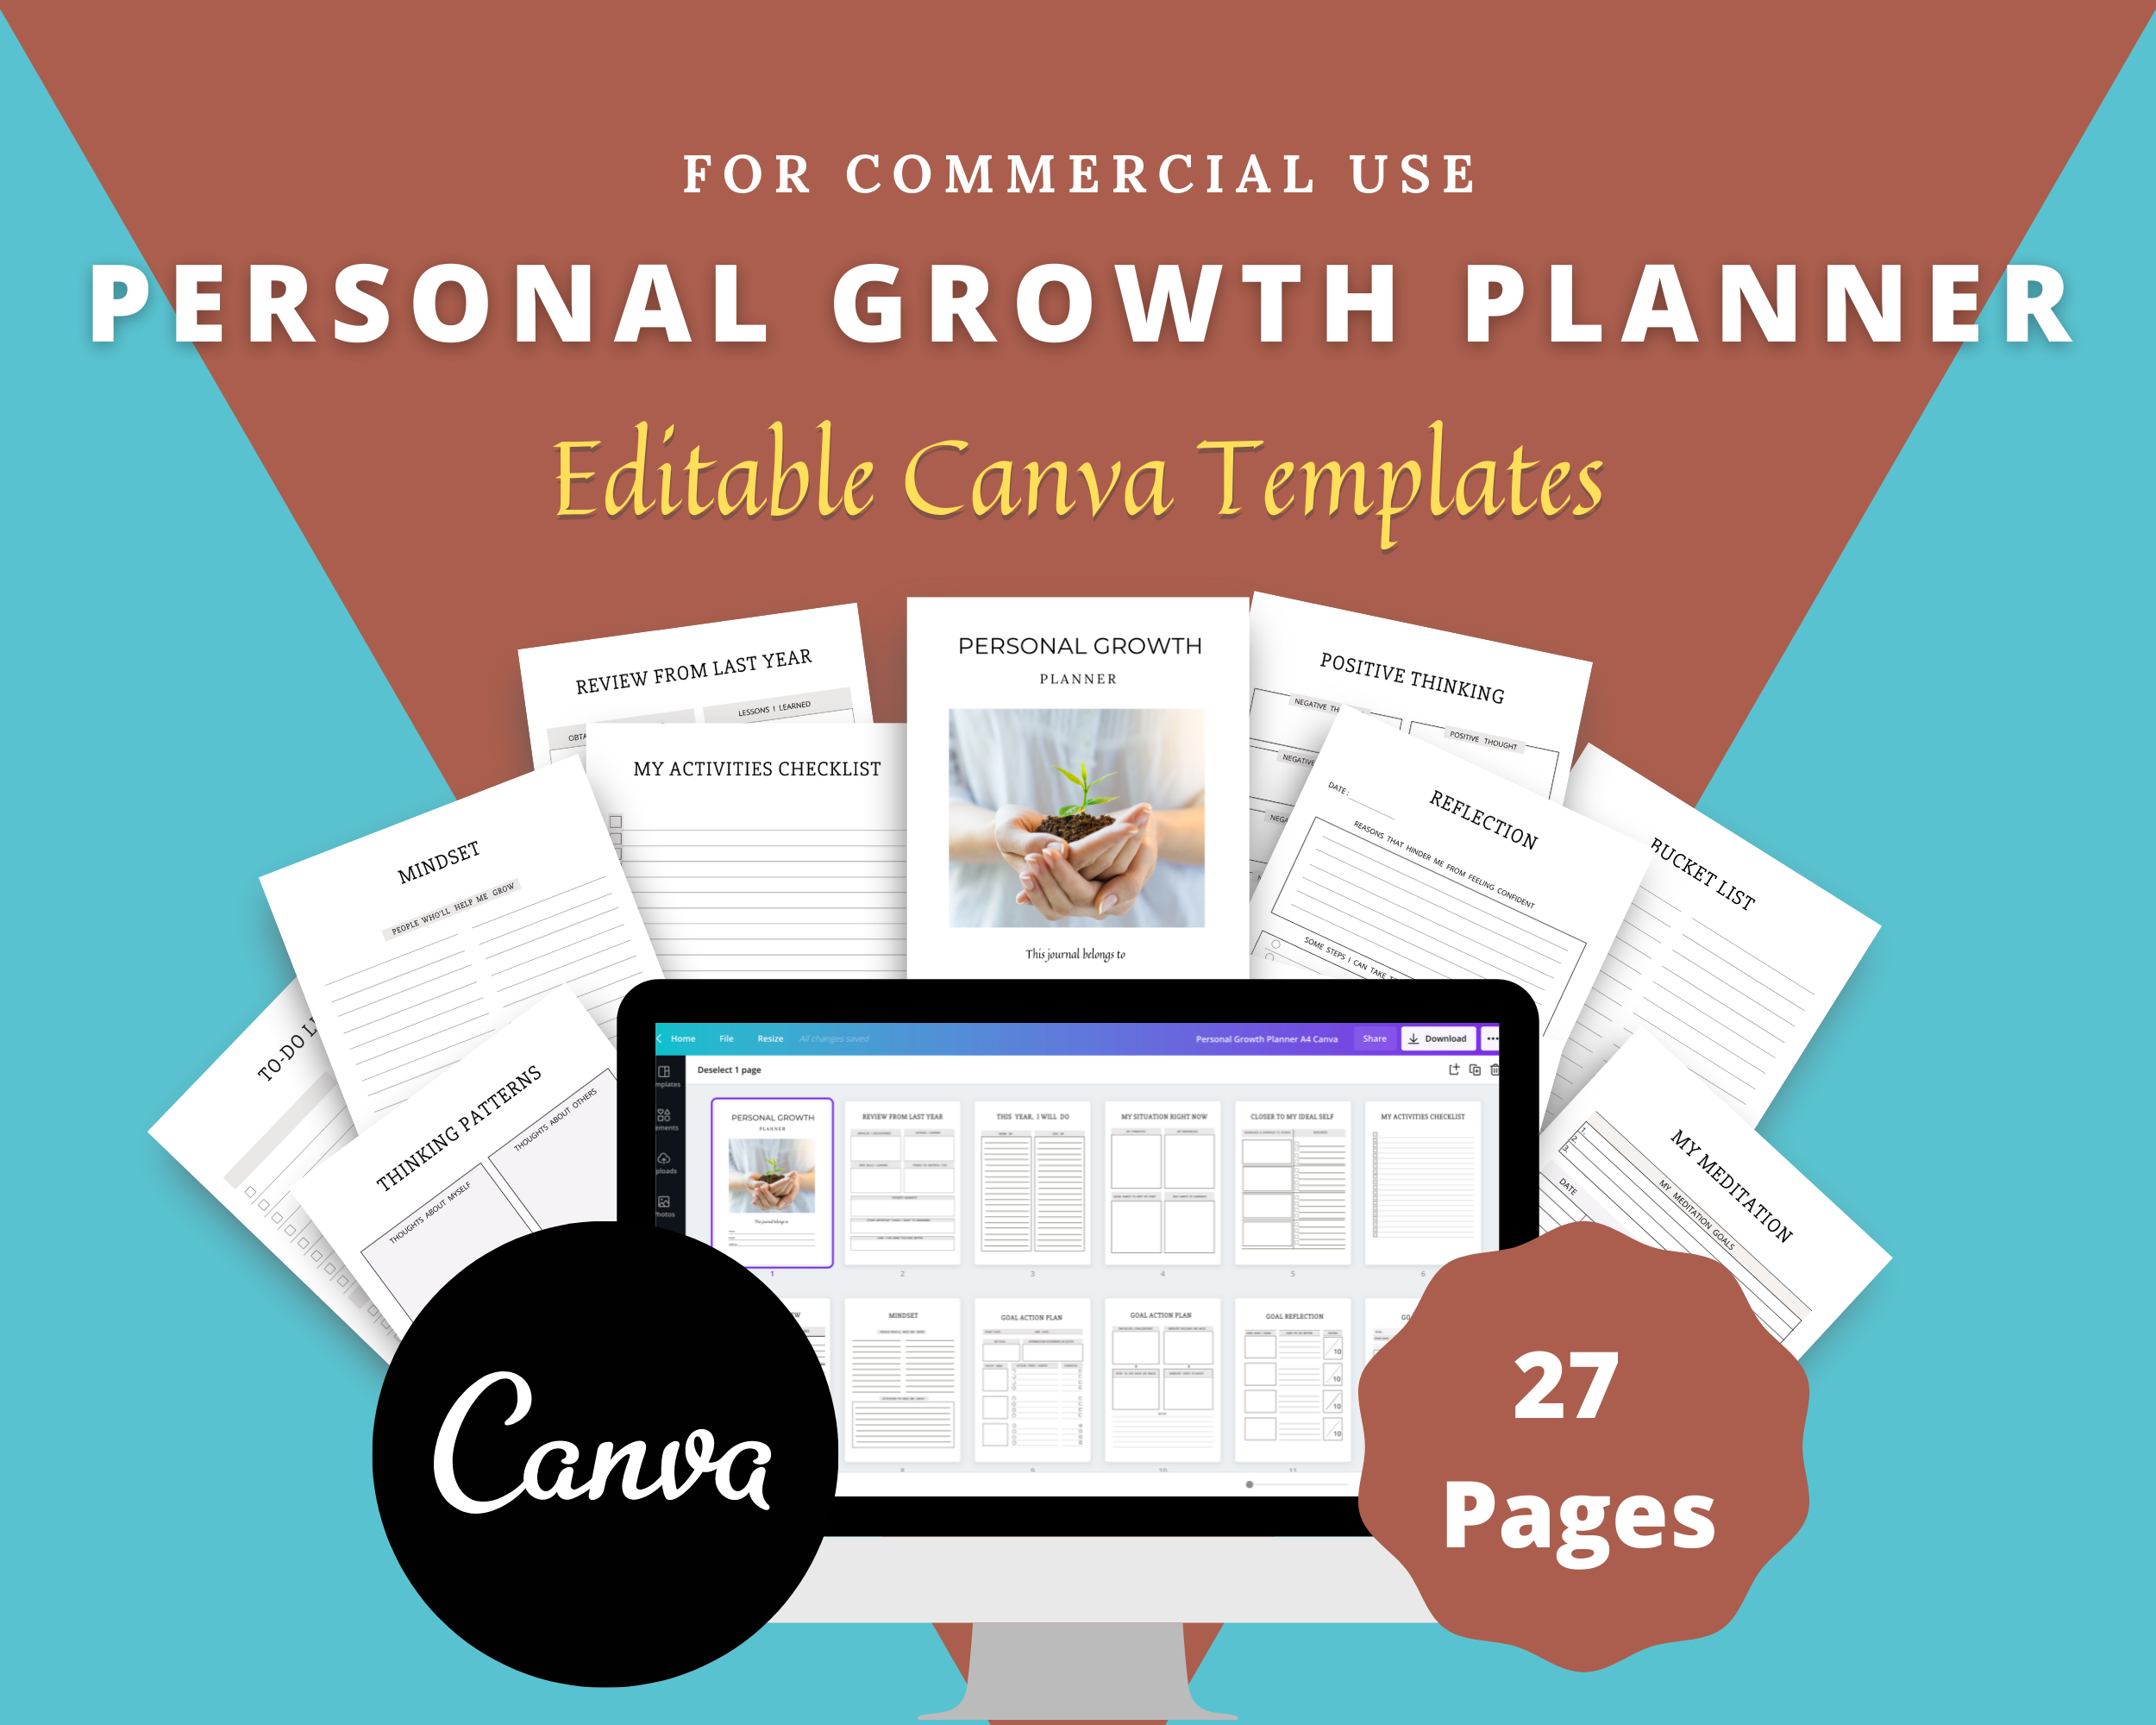 Editable Personal Growth Planner Templates in Canva | Commercial Use